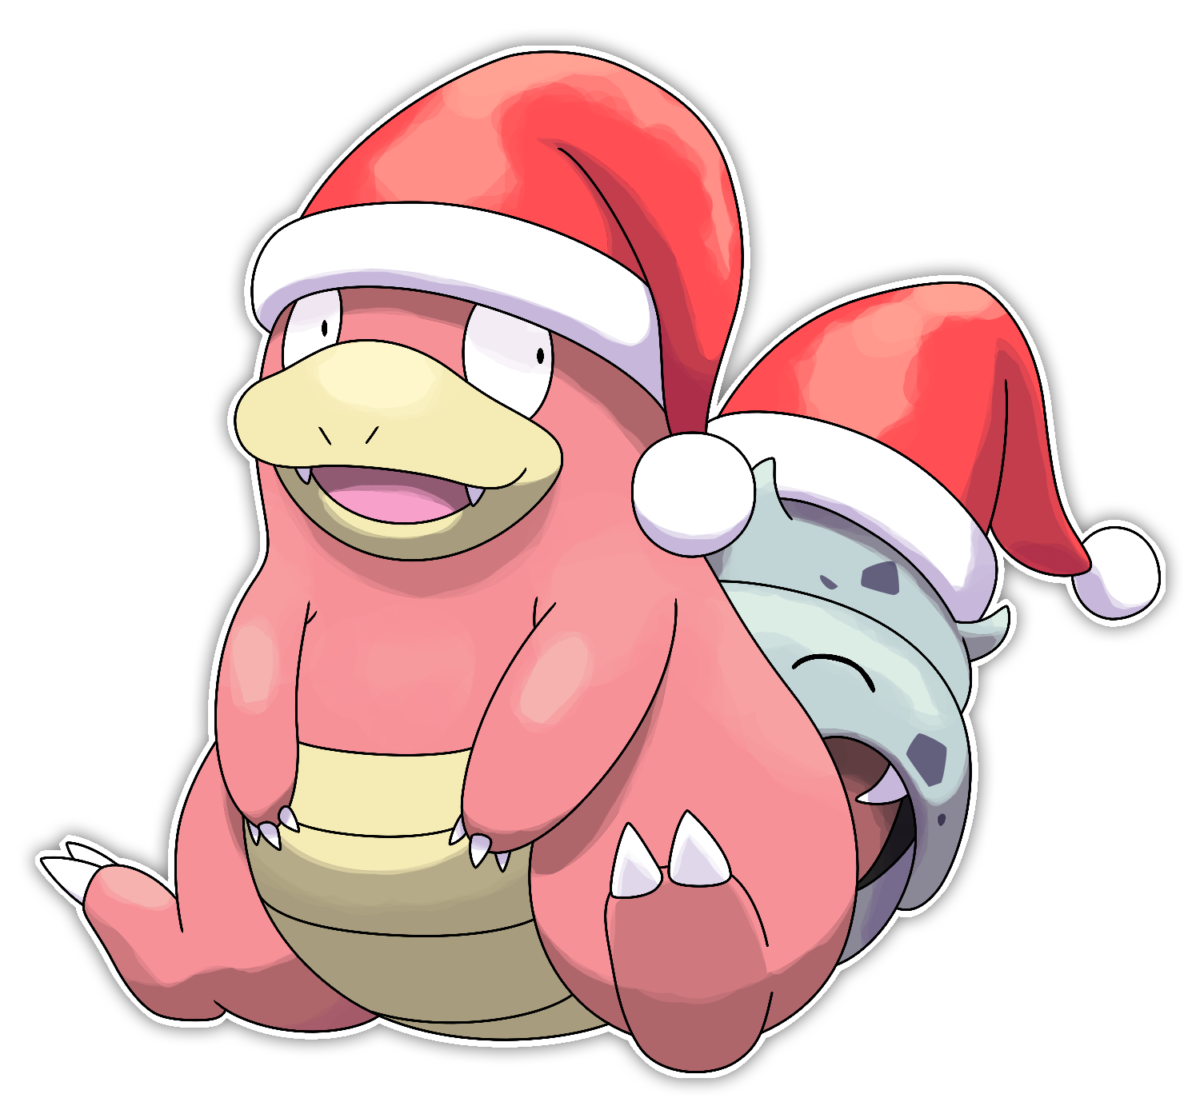 Slowbro – Commission by Smiley-Fakemon on DeviantArt